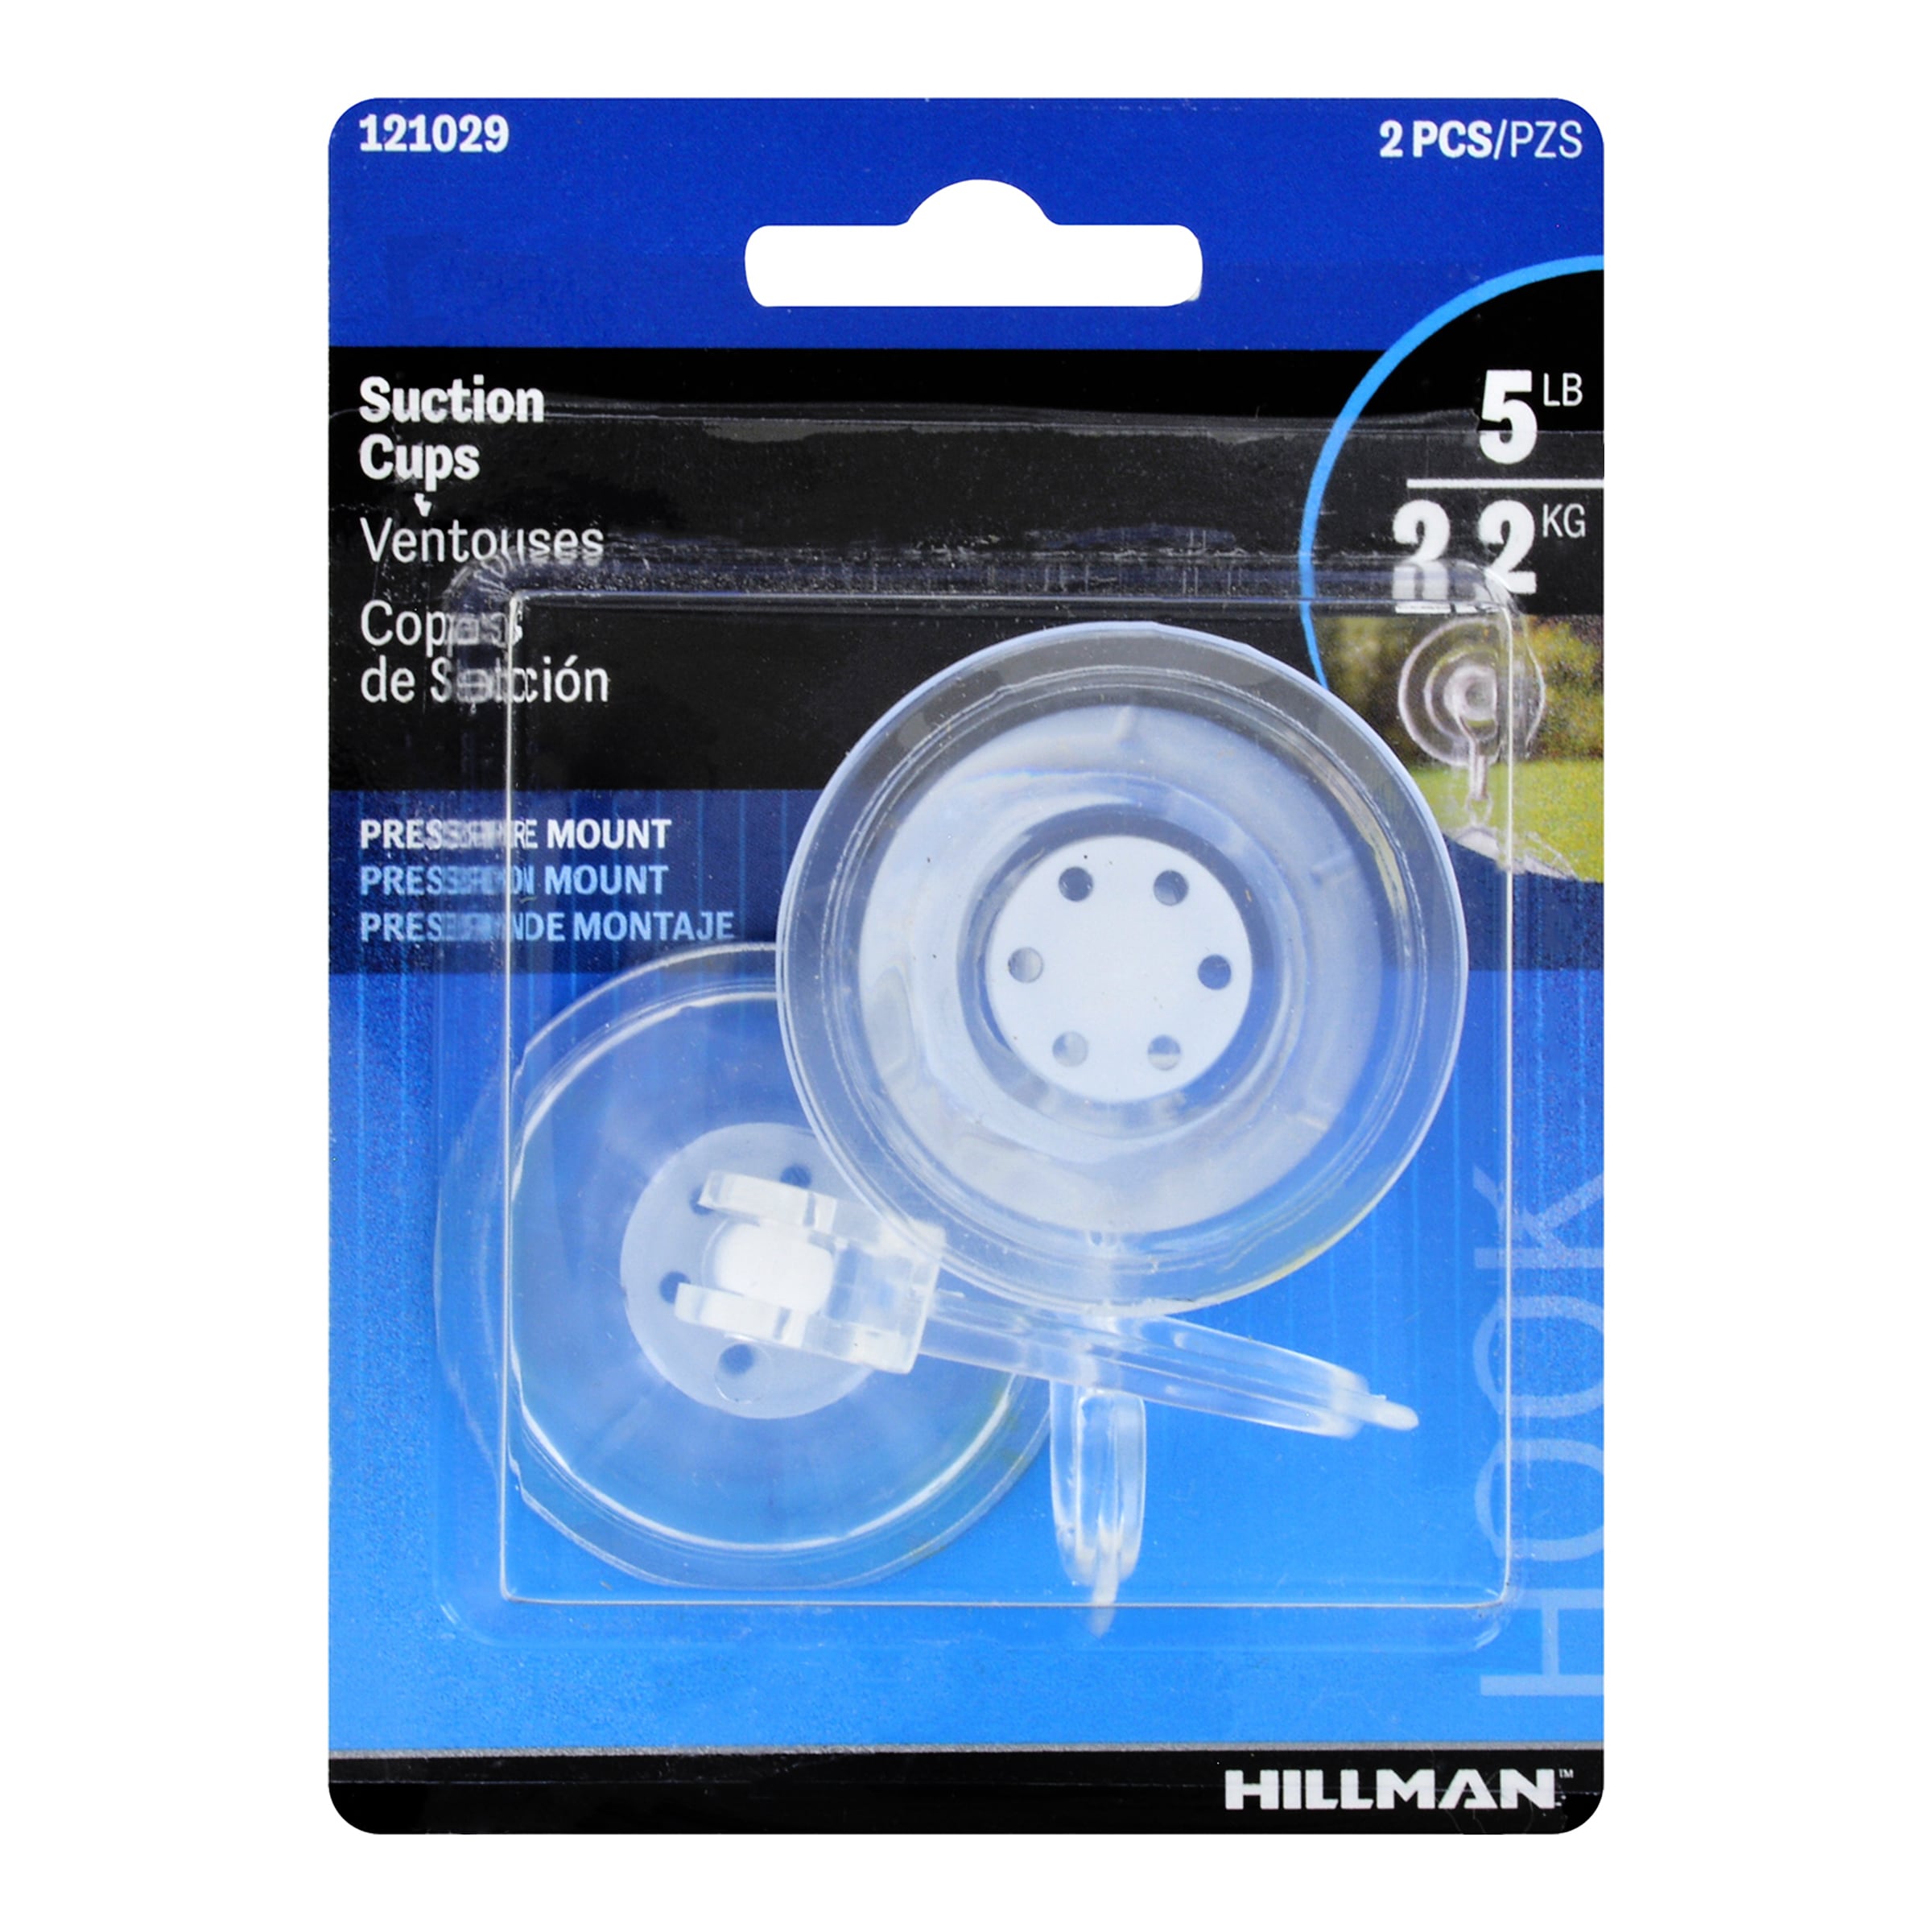 Hillman Large Clear Suction Cup | 121028